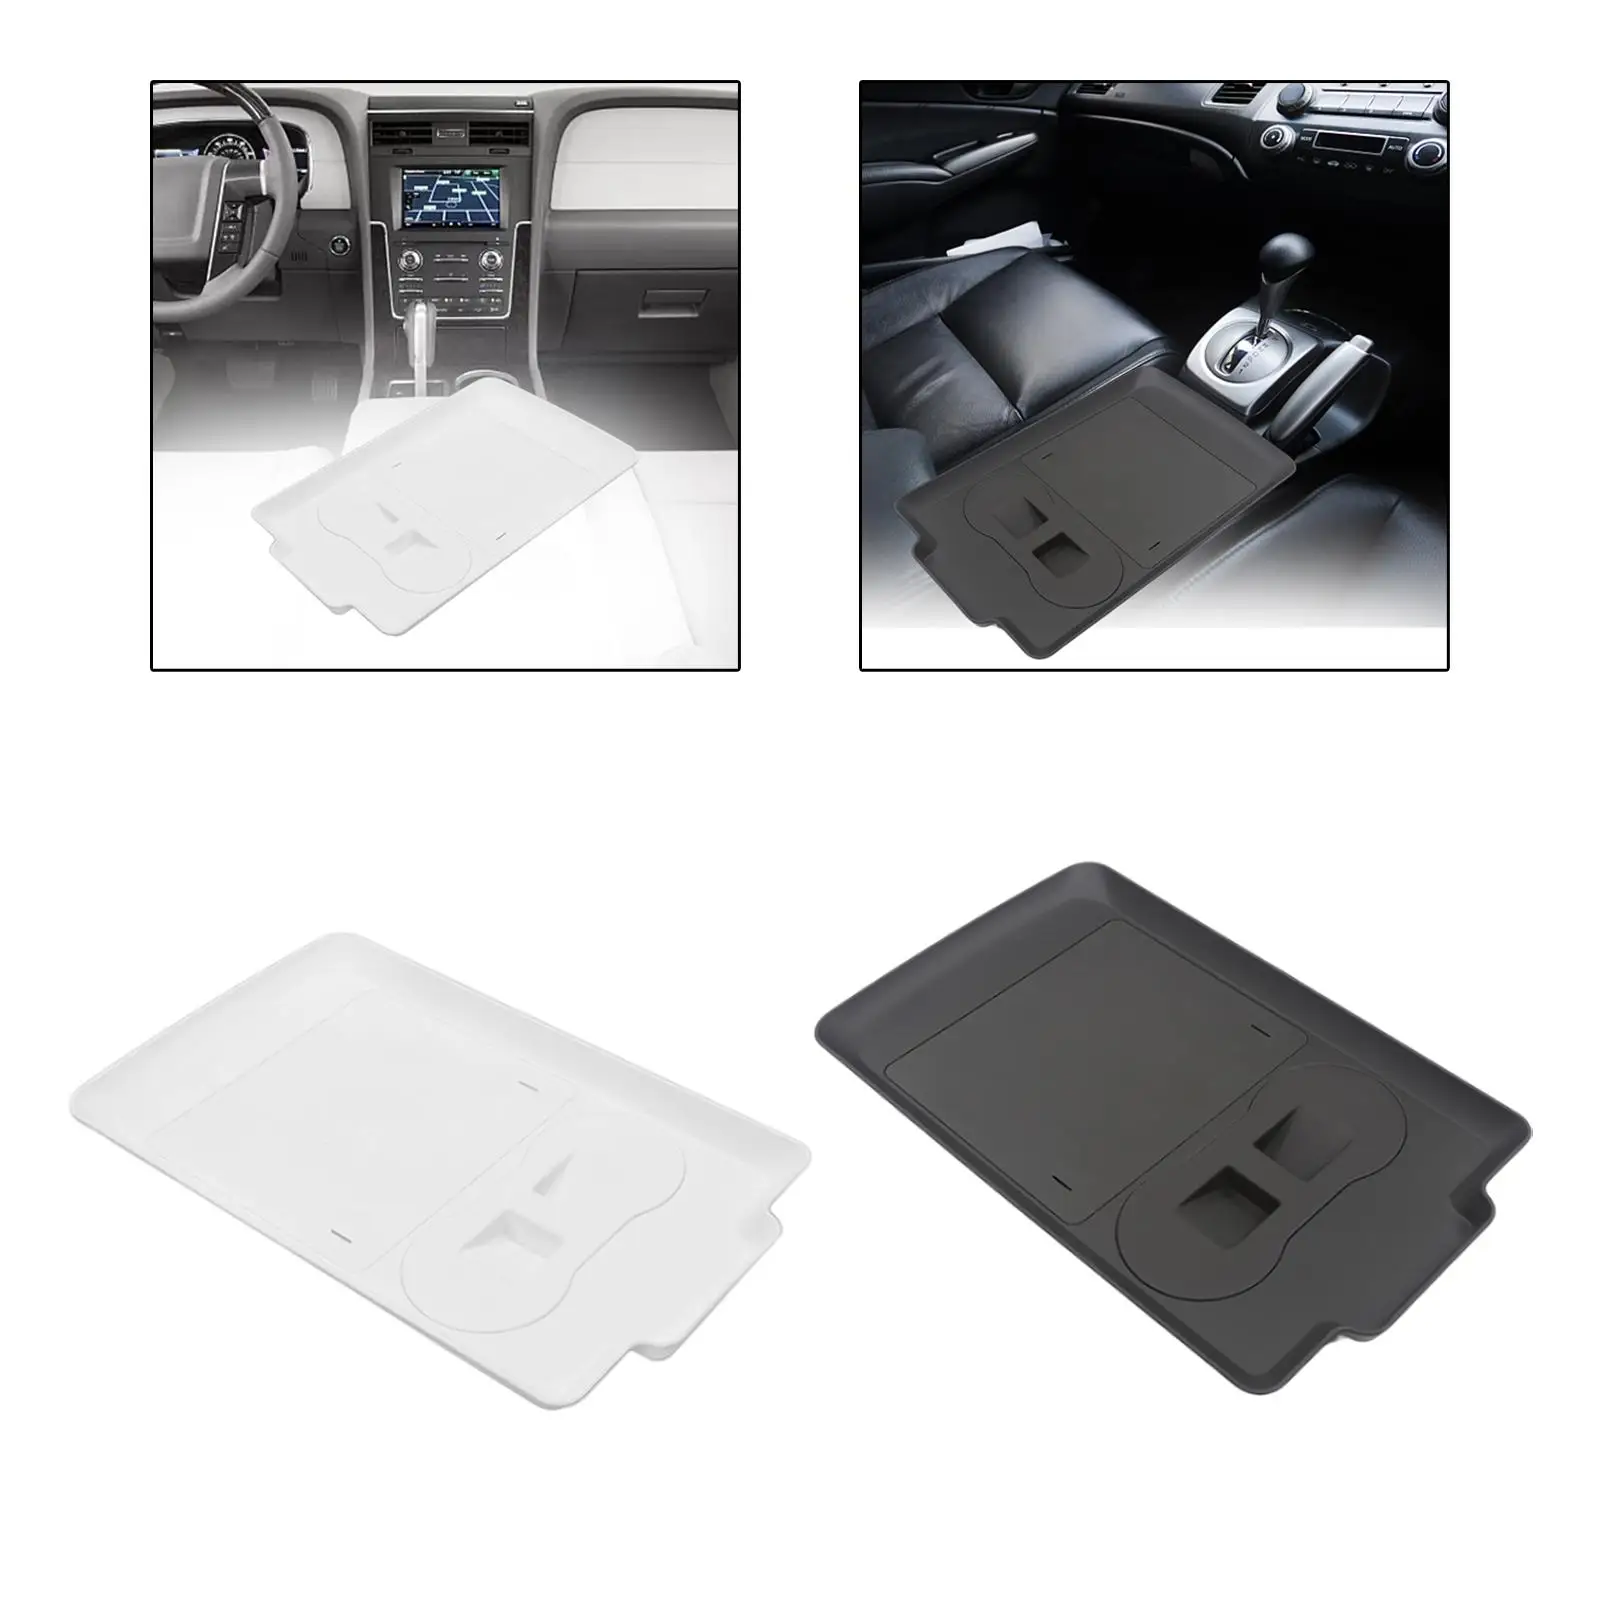 Food Eating Table Comfortable Drinks Holder Center Console Tray for Model Y Laptop Drink Road Trips 2021 2022